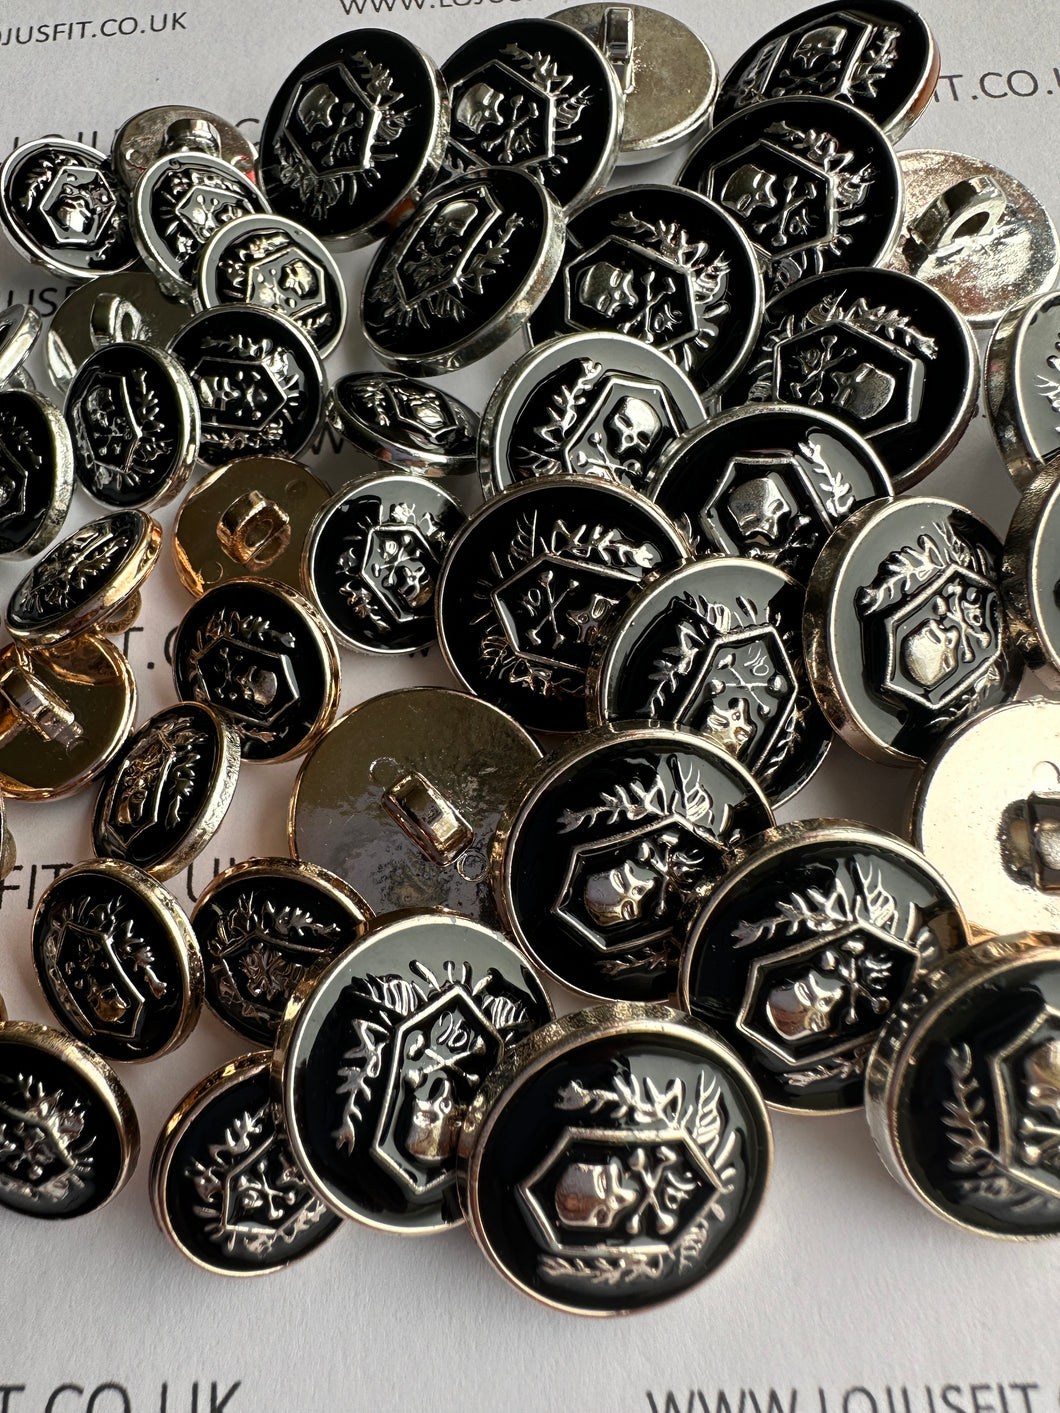 5 10 20 SKULL SILVER BLACK or LIGHT GOLD BLACK 15mm 21mm Wide Shank Quality Buttons Dresses Tops Coats Babies Blazers Shirt Sewing Craft